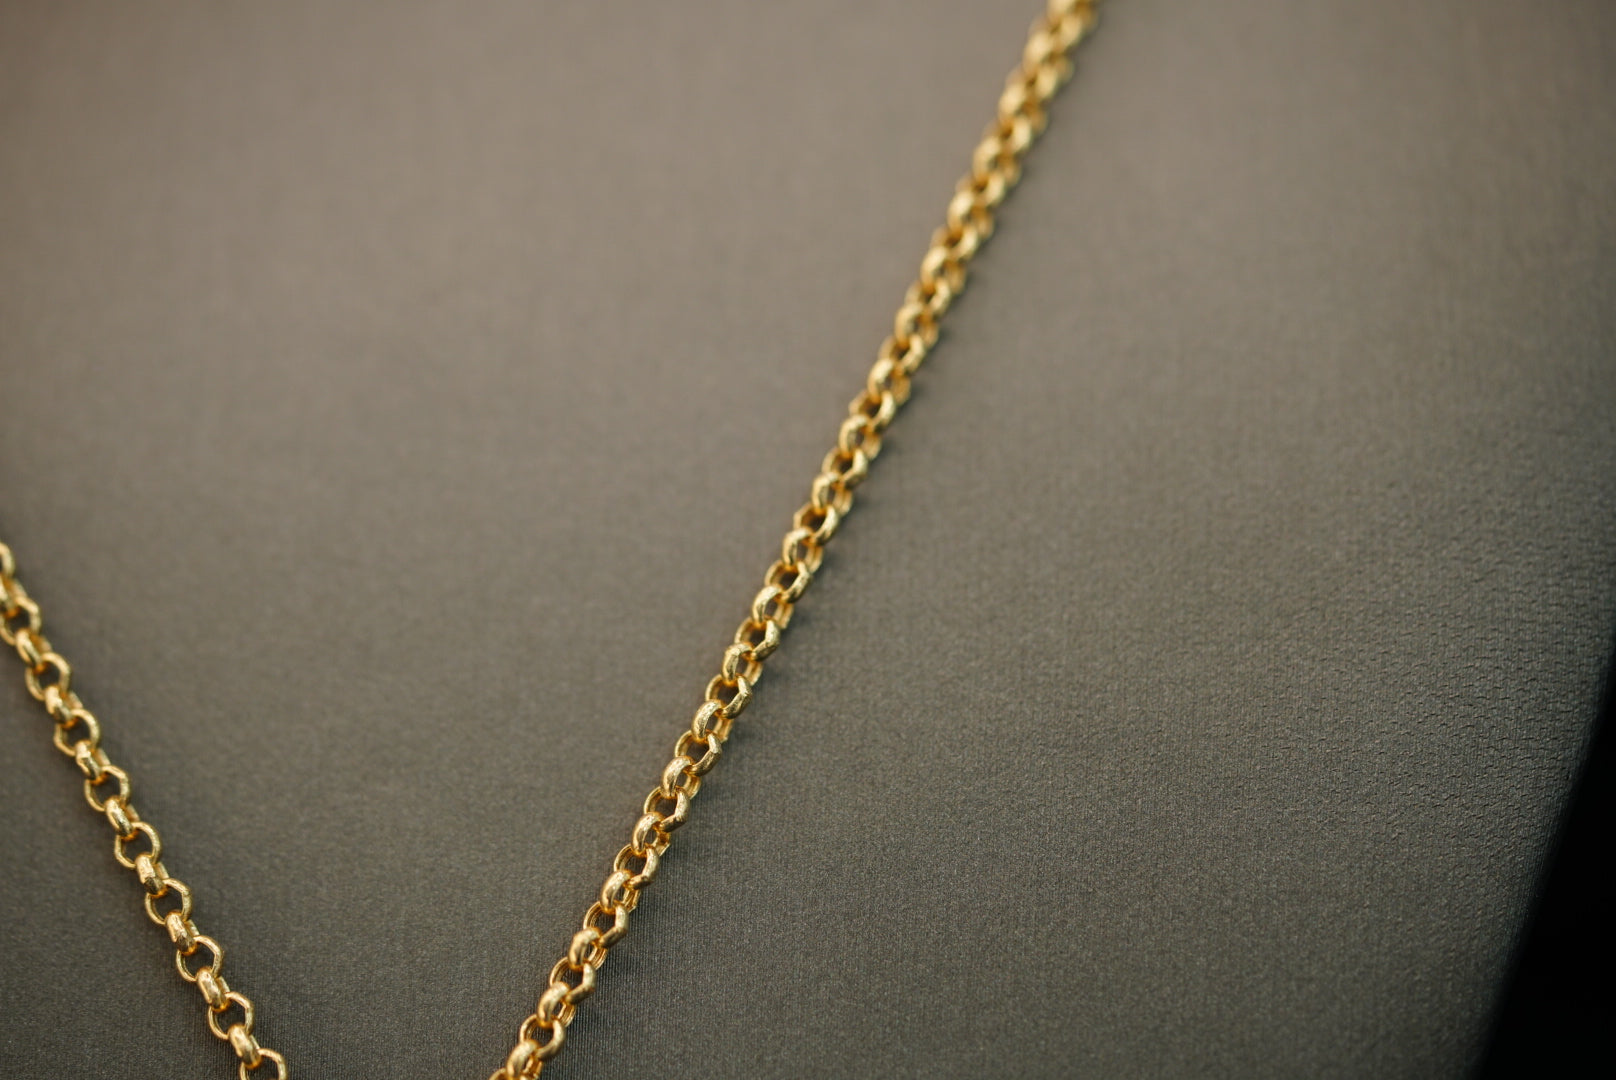 14K Set Rolo Chain with Cross Pendant